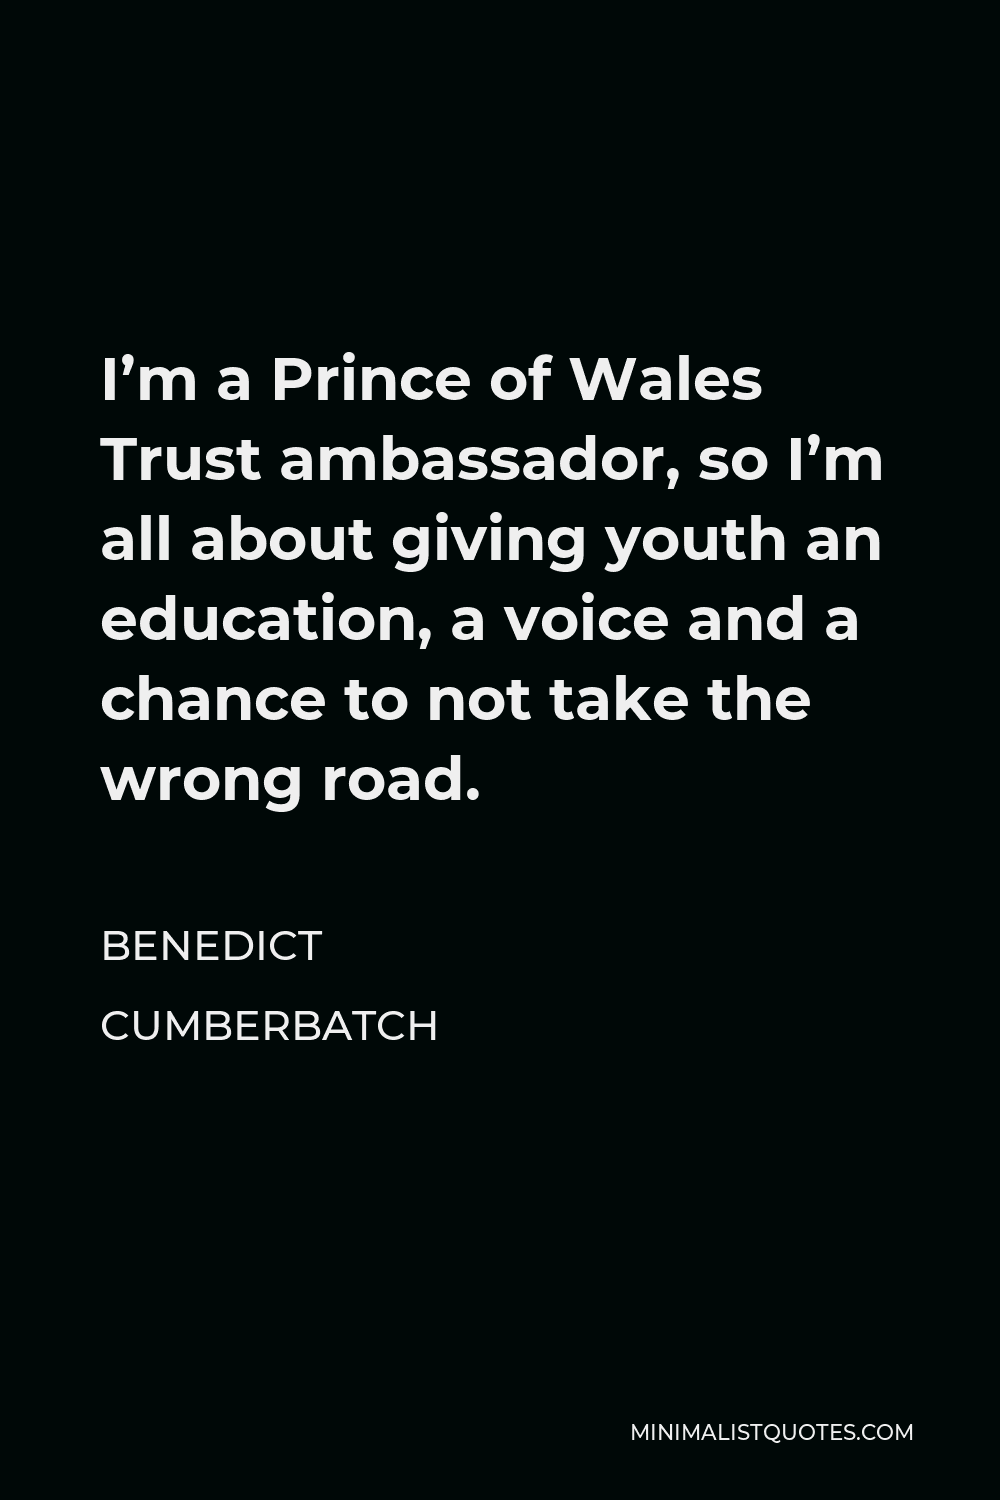 Benedict Cumberbatch Quote - I’m a Prince of Wales Trust ambassador, so I’m all about giving youth an education, a voice and a chance to not take the wrong road.